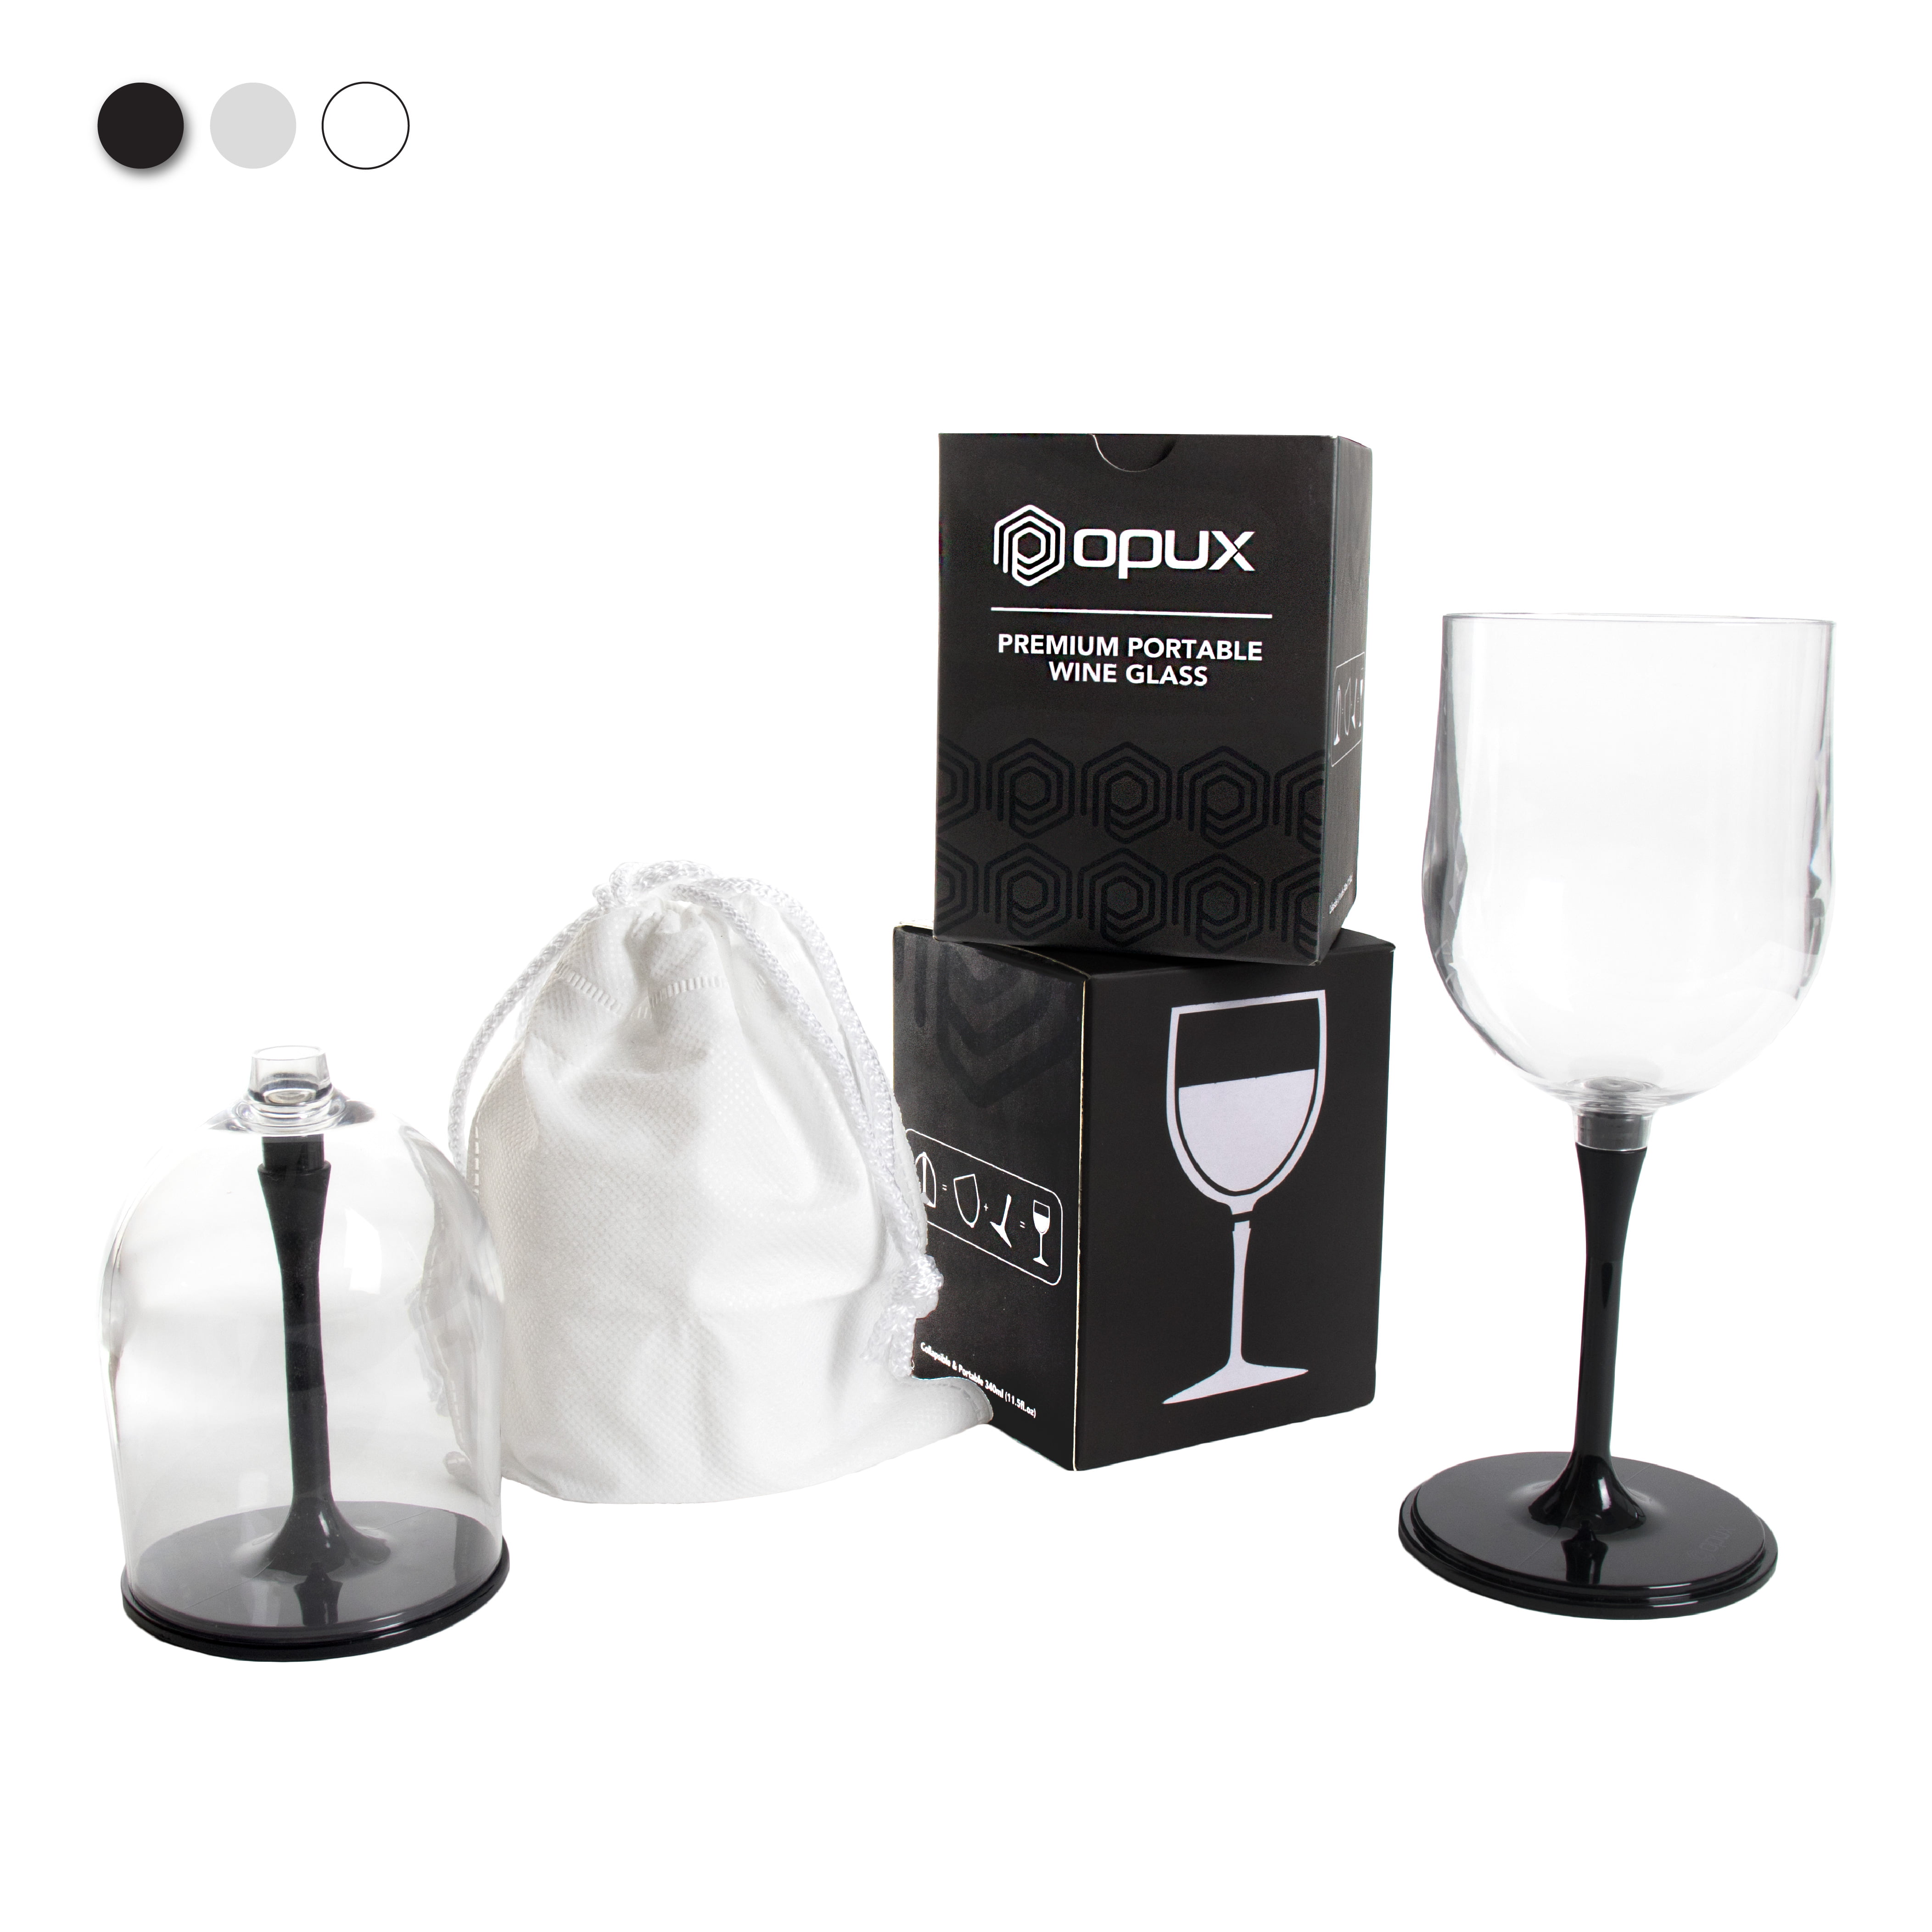 Resin Travel Wine Glasses Portable Detachable Plastic Wine Glasses  Lightweight Fall Resistance Shatterproof for Camping Outdoor